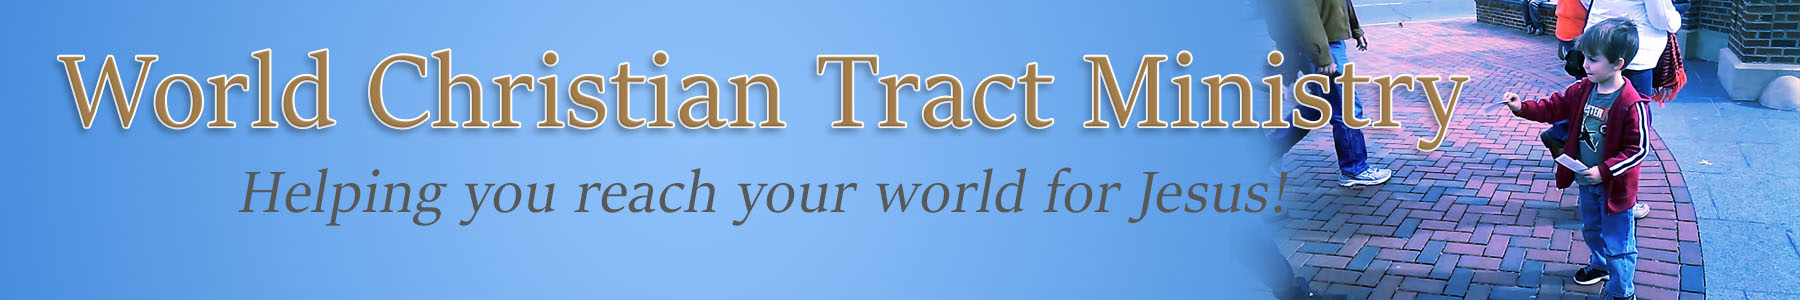 World Christian Tract Minstry - Helping you reach your world for Jesus